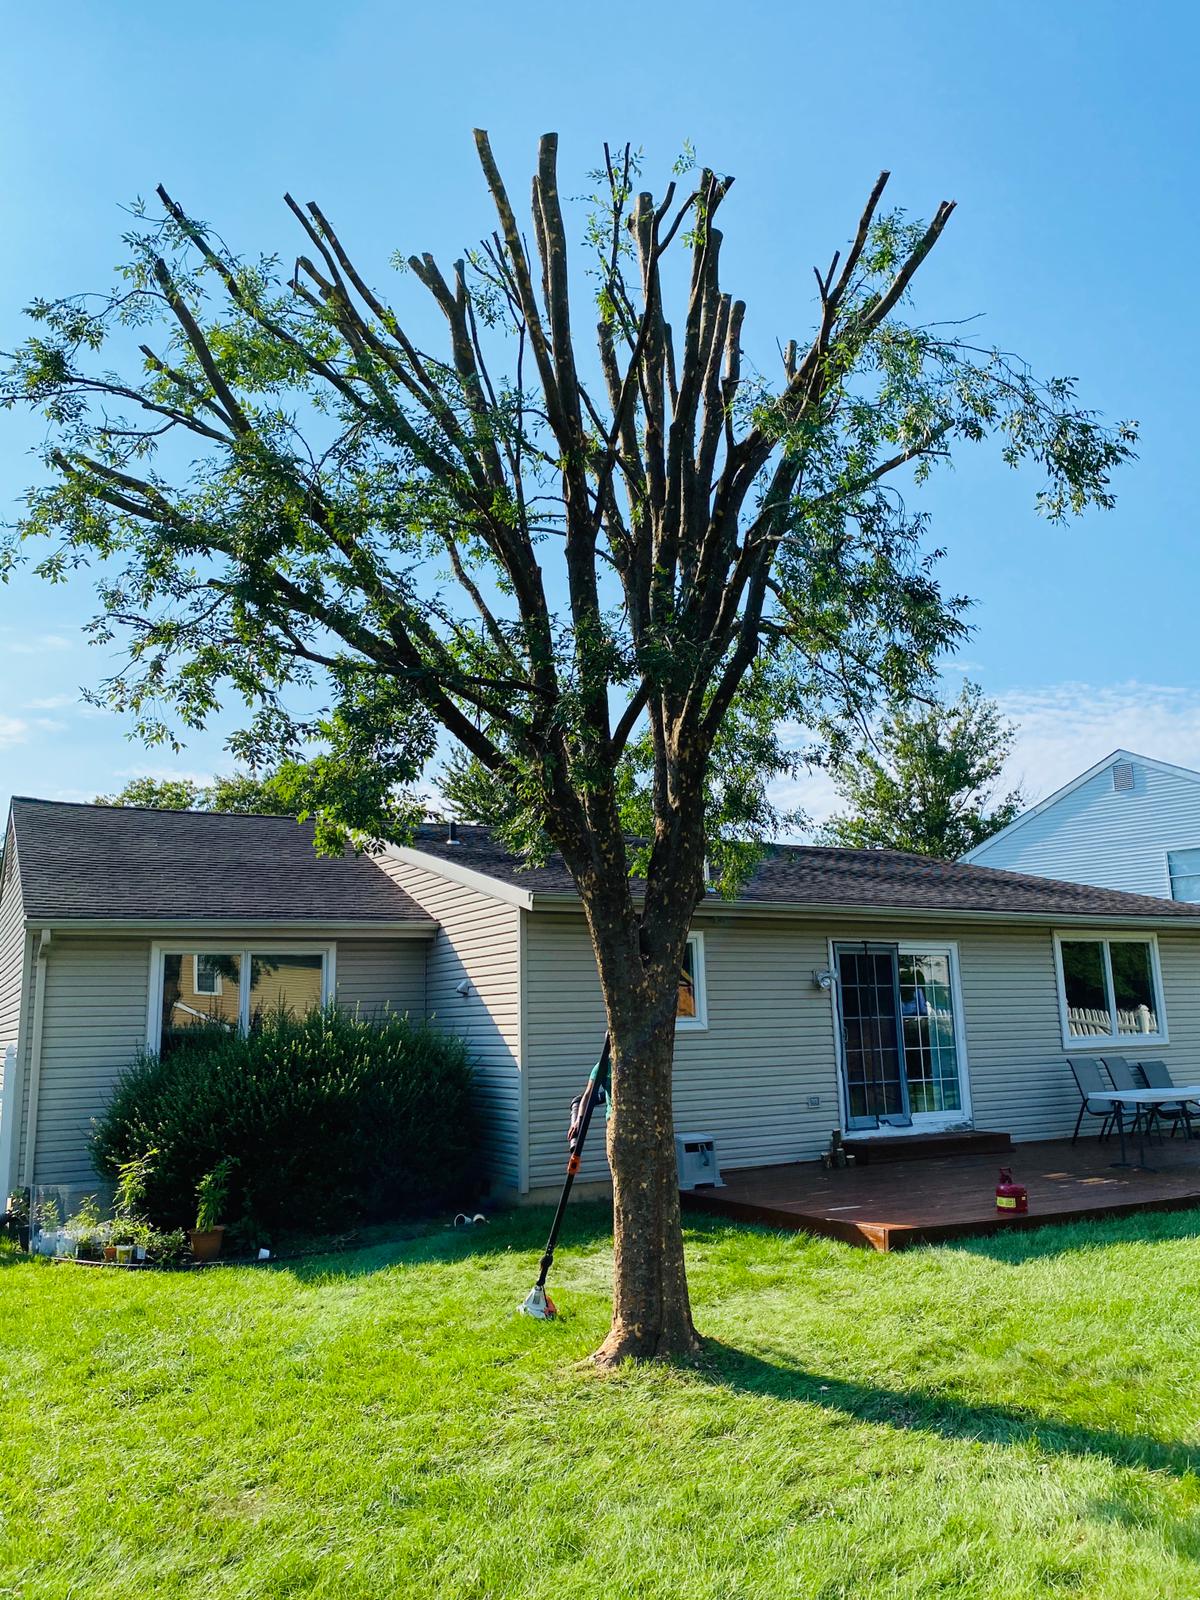 A.C. Tree Service LLC-91 Manor Dr Hagerstown, MD 21740-1-301-302-6467 (2)